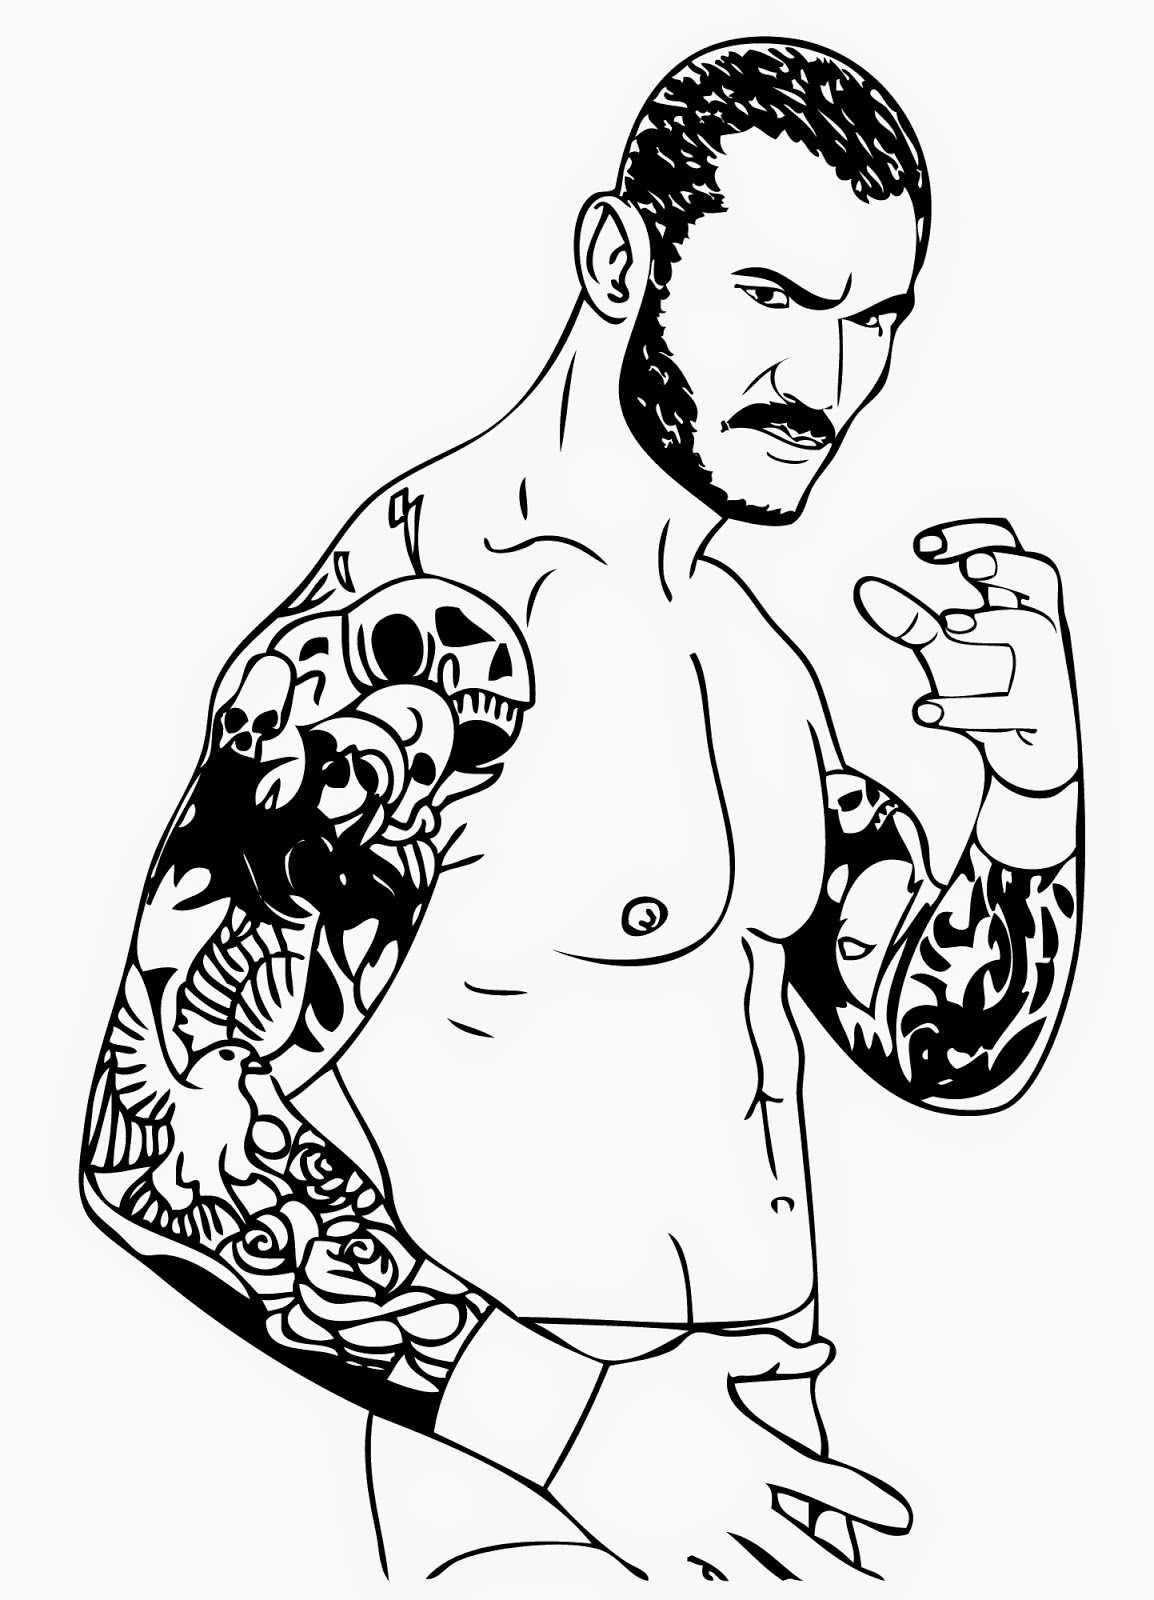 coloring wwe the best free wwe drawing images download from 614 free coloring wwe 